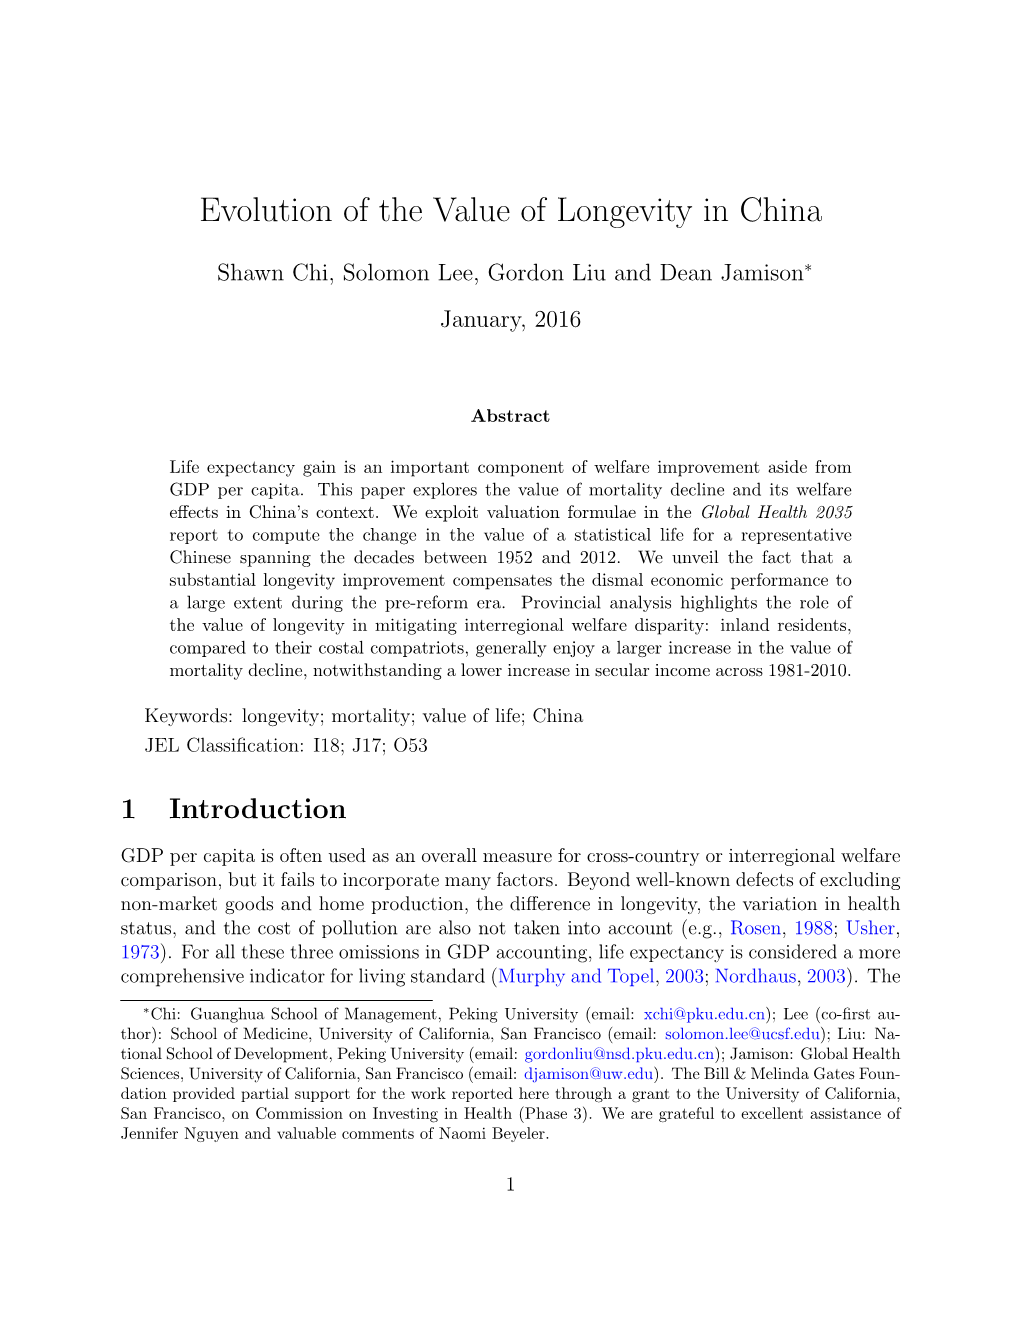 Evolution of the Value of Longevity in China